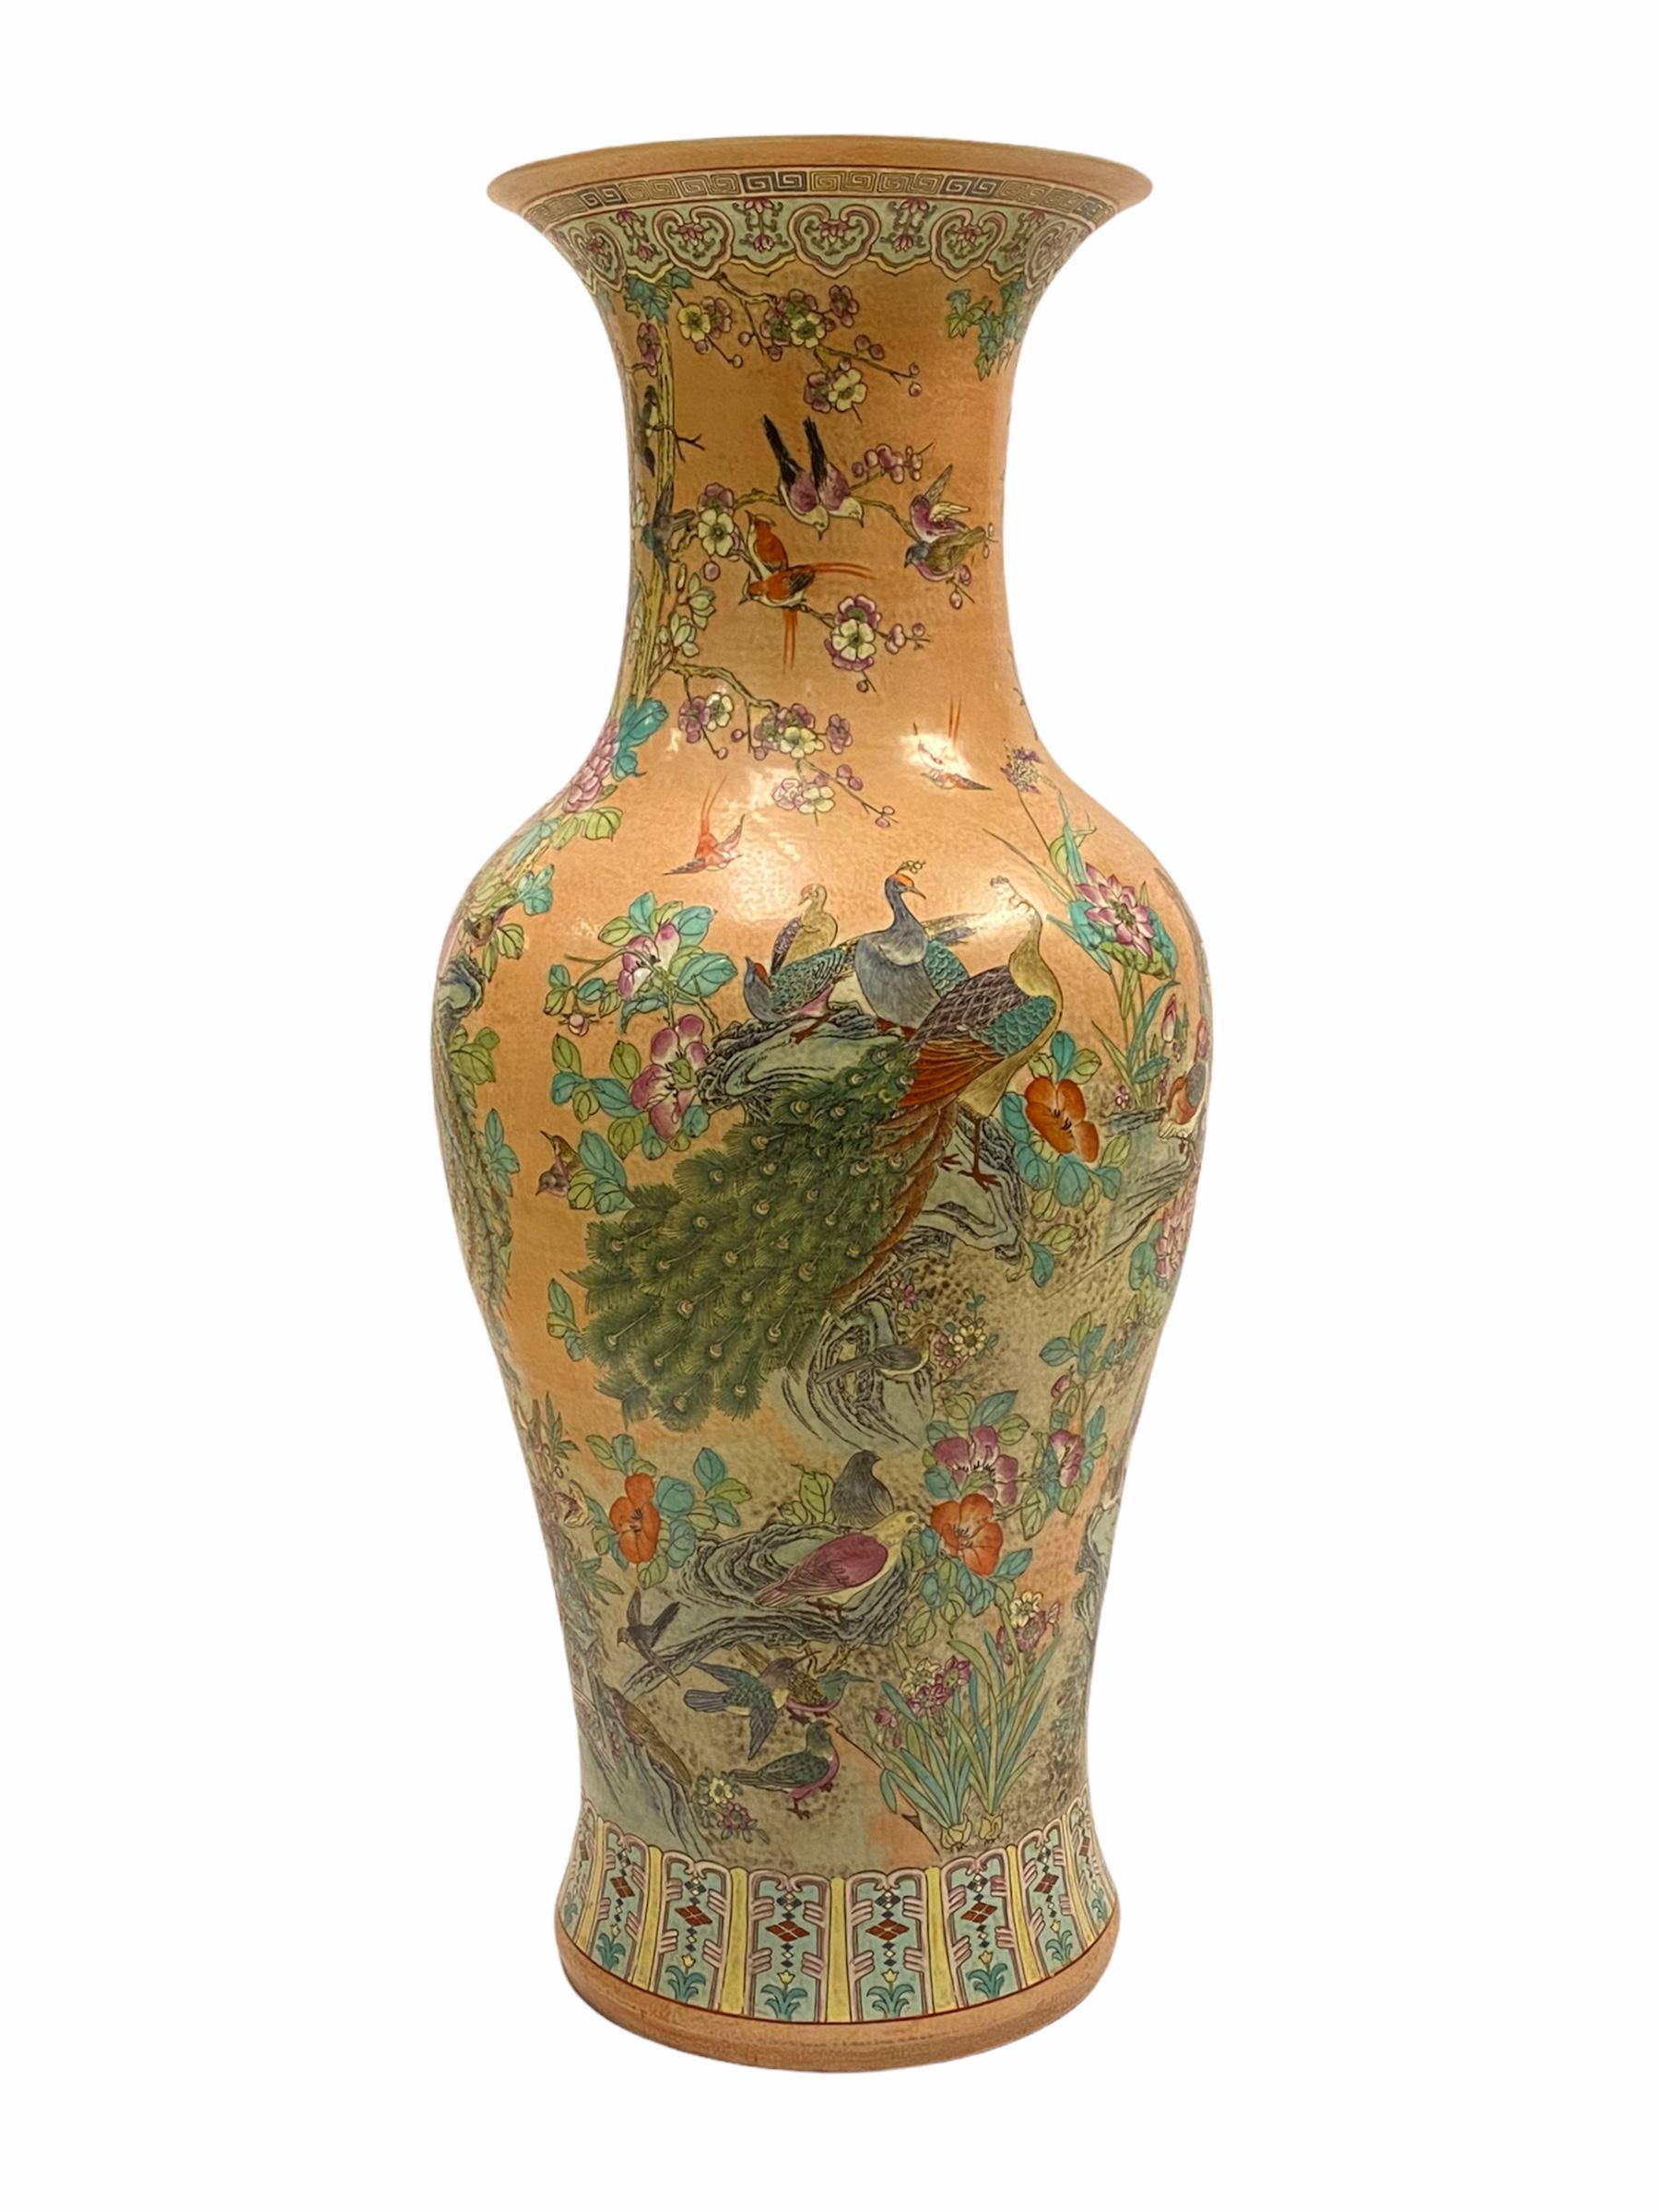 Pair of very large Chinese late Republic period porcelain vases painted with Peacocks and flowers.